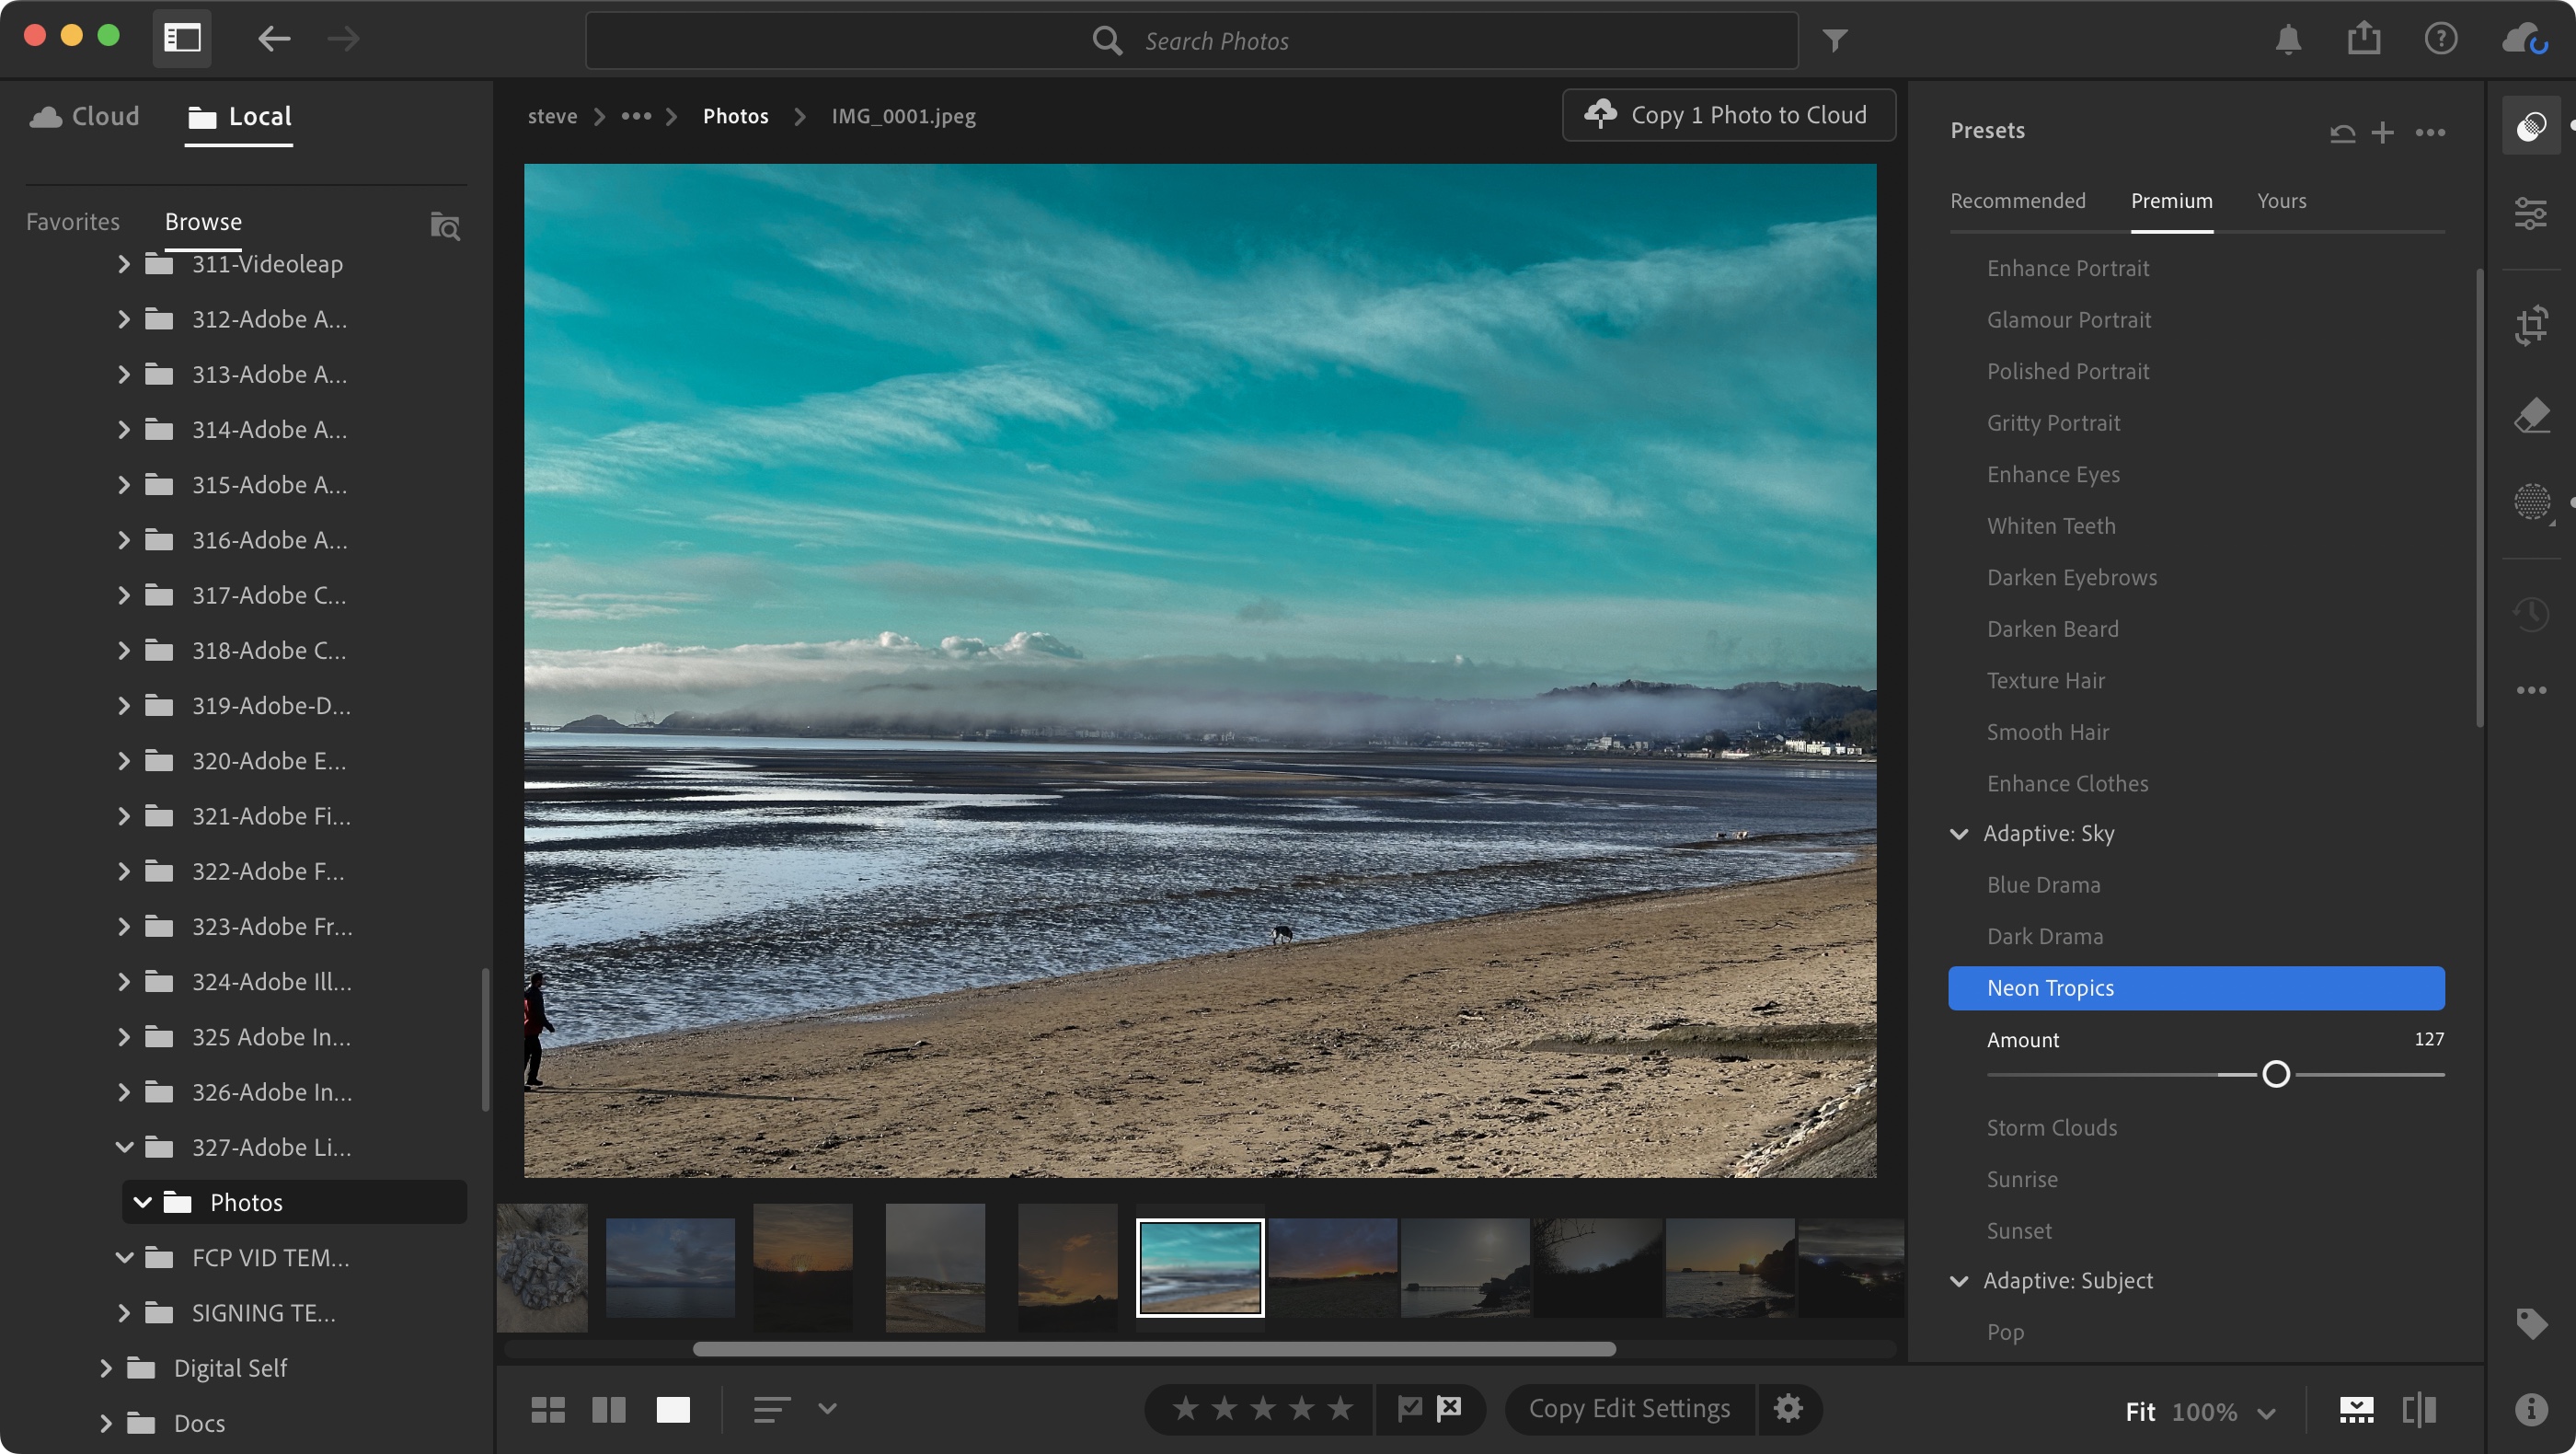 Adobe Lightroom during our review